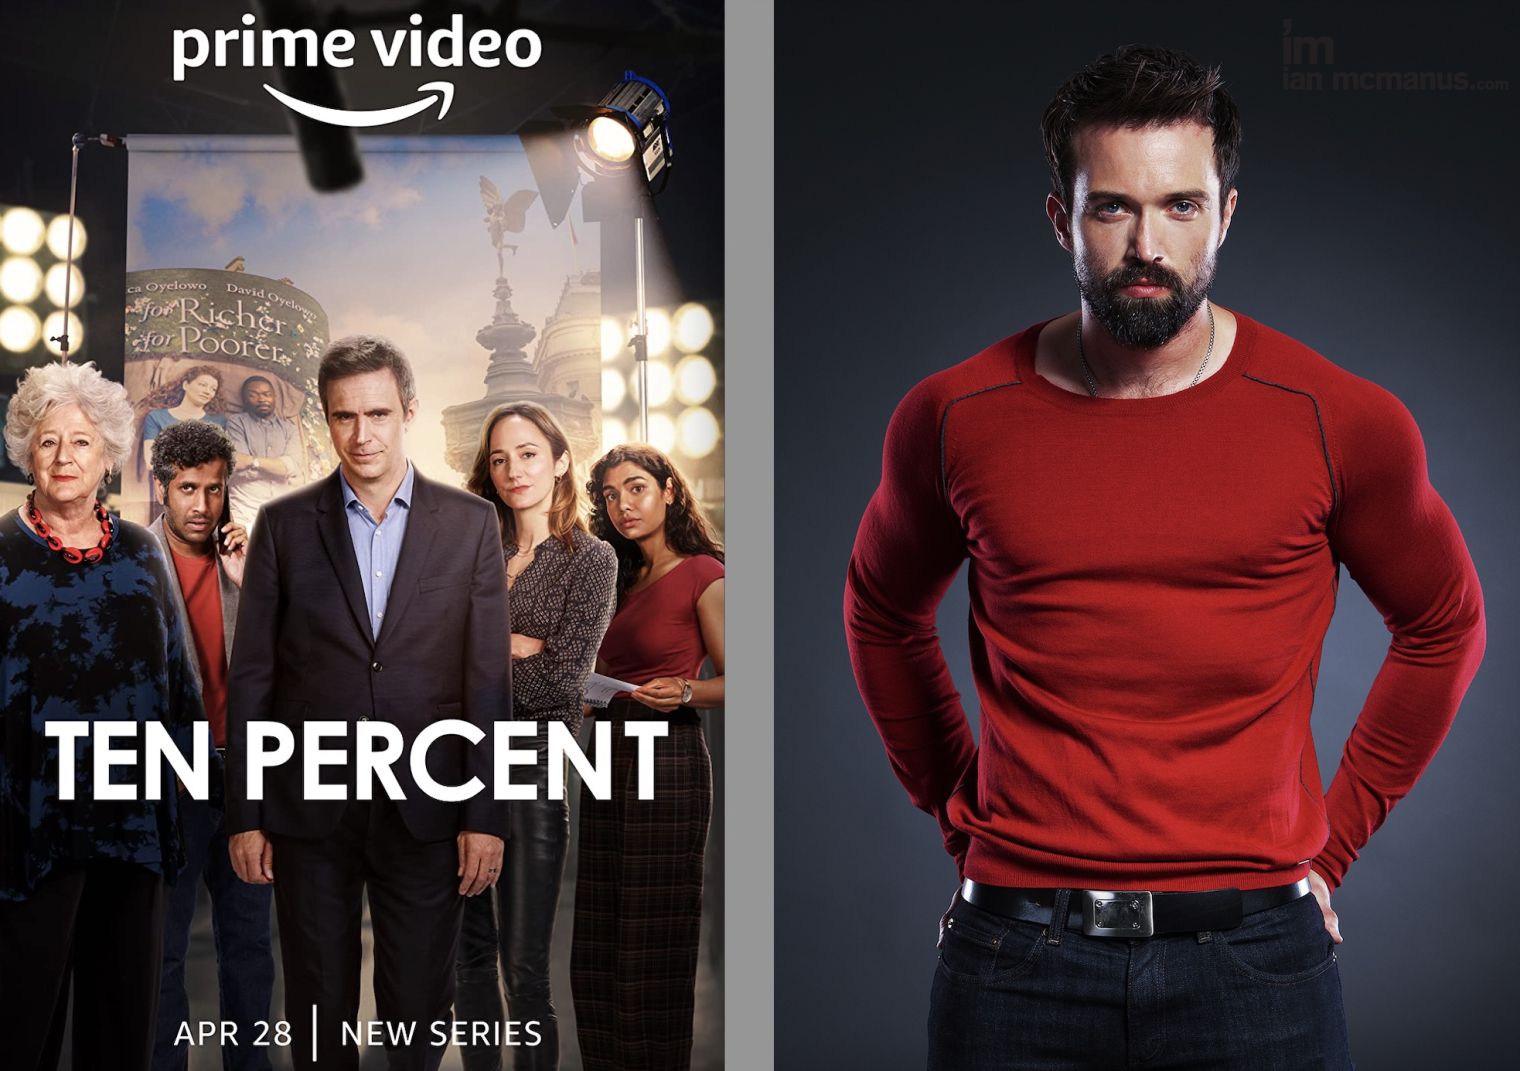 Emmett J. Scanlan plays Marcus Macleod in new comedy Ten Per Cent which launches in the UK on Amazon Prime today